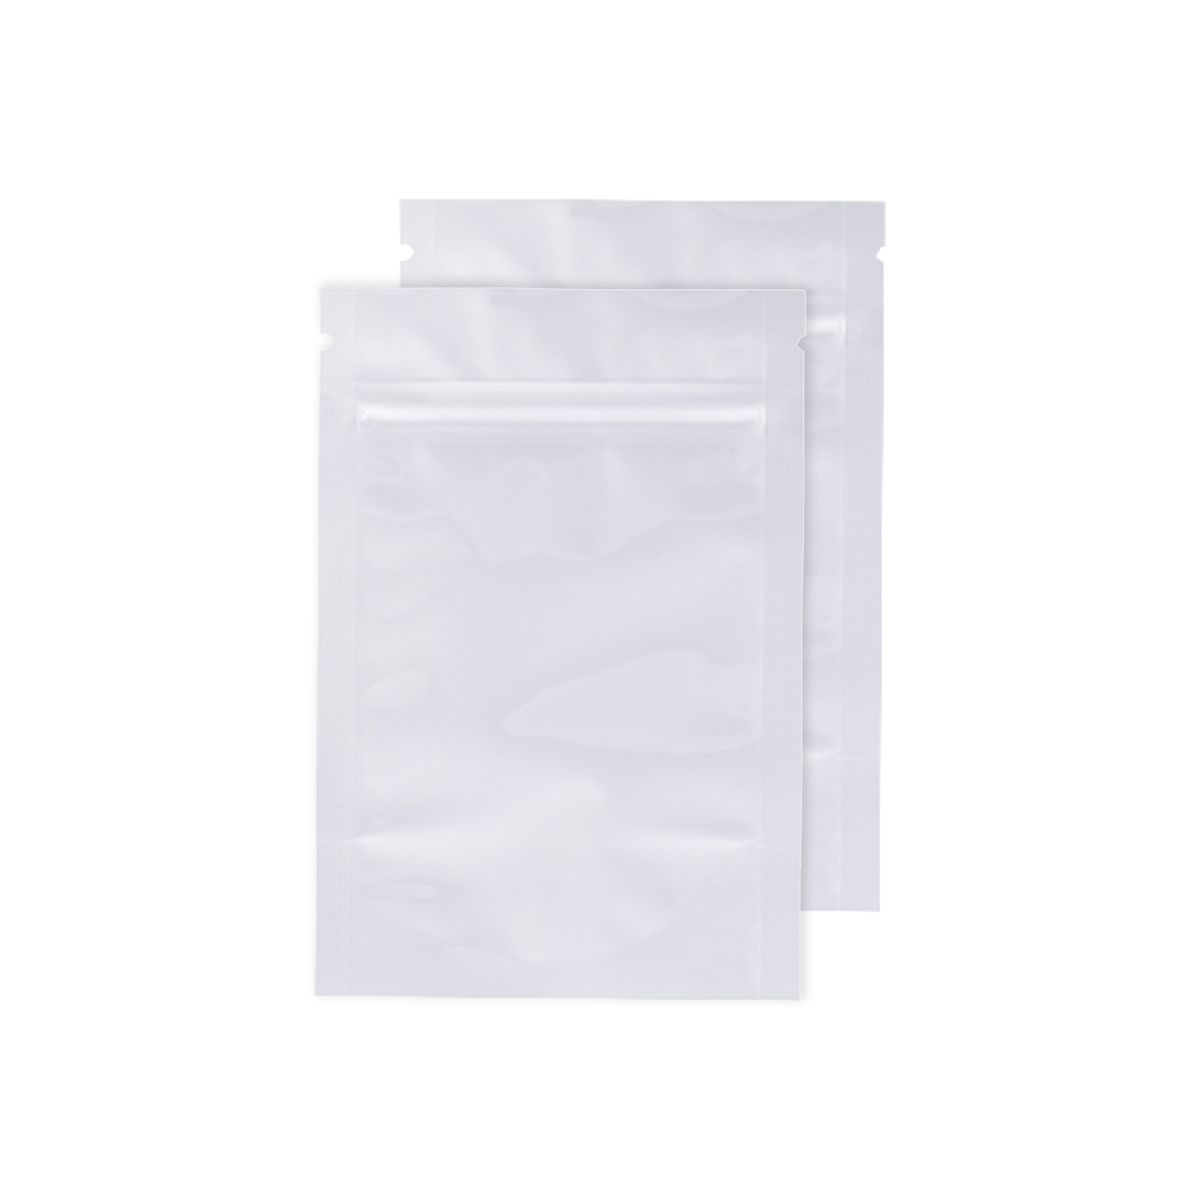 Eighth Ounce White/White Opaque Barrier Bags